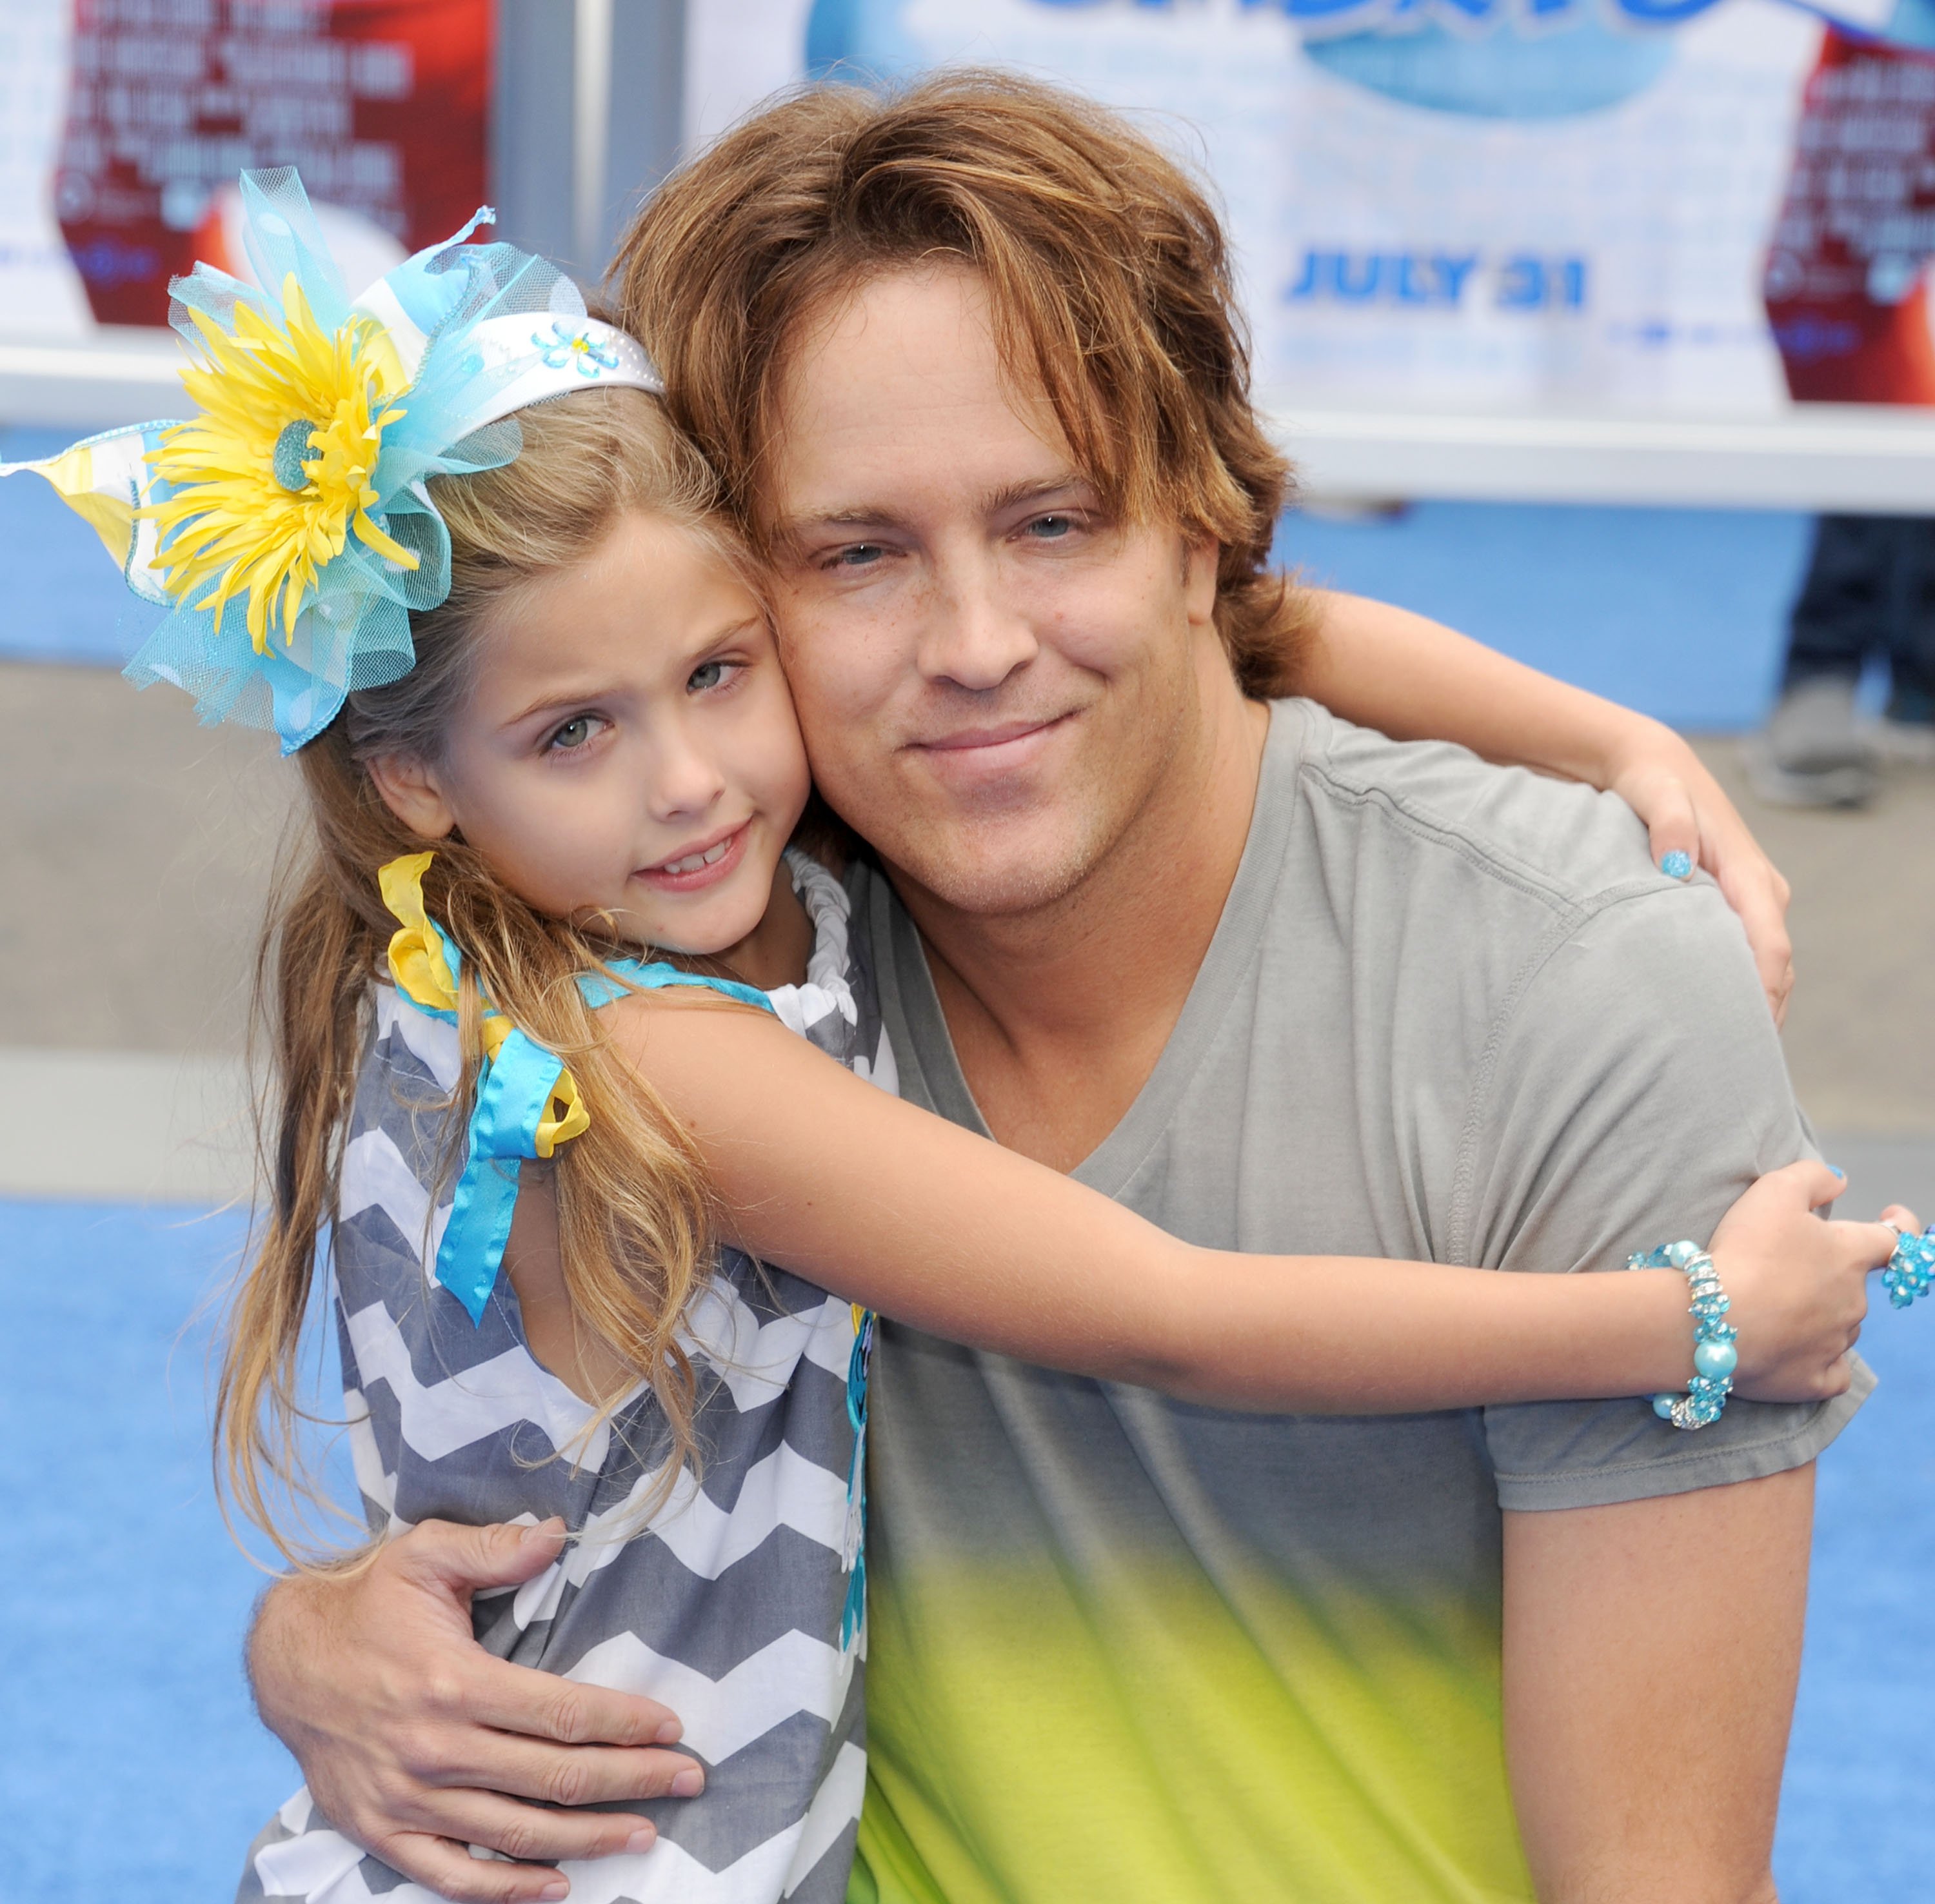 Larry Birkhead and his daughter Dannielynn Birkhead at the Los Angeles "Smurfs 2" premiere on July 28, 2013, in Westwood, California | Source: Getty Images